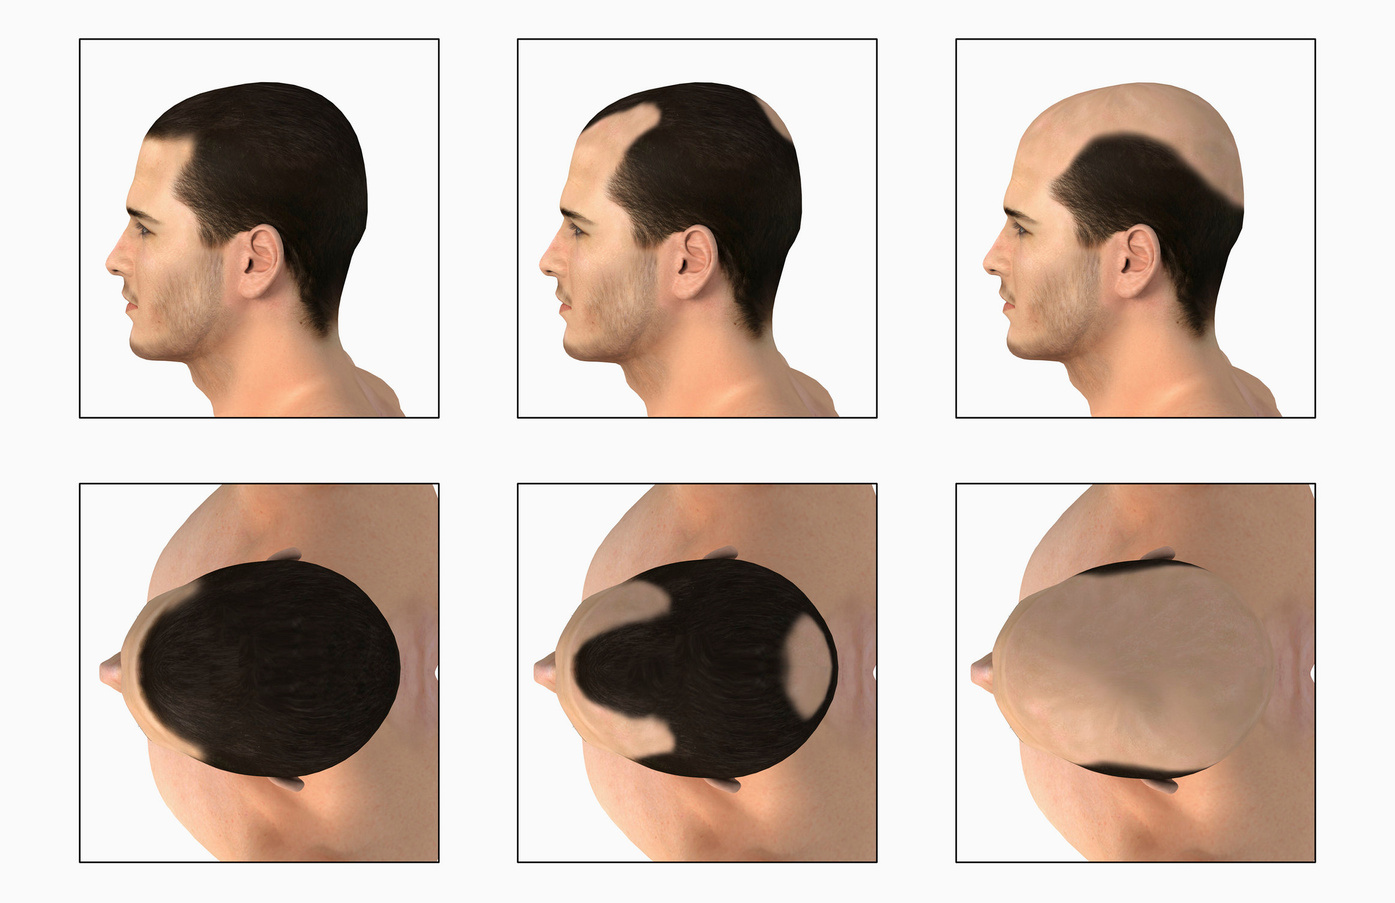 Illustration depicting the process of balding. A series of above and side views are shown.